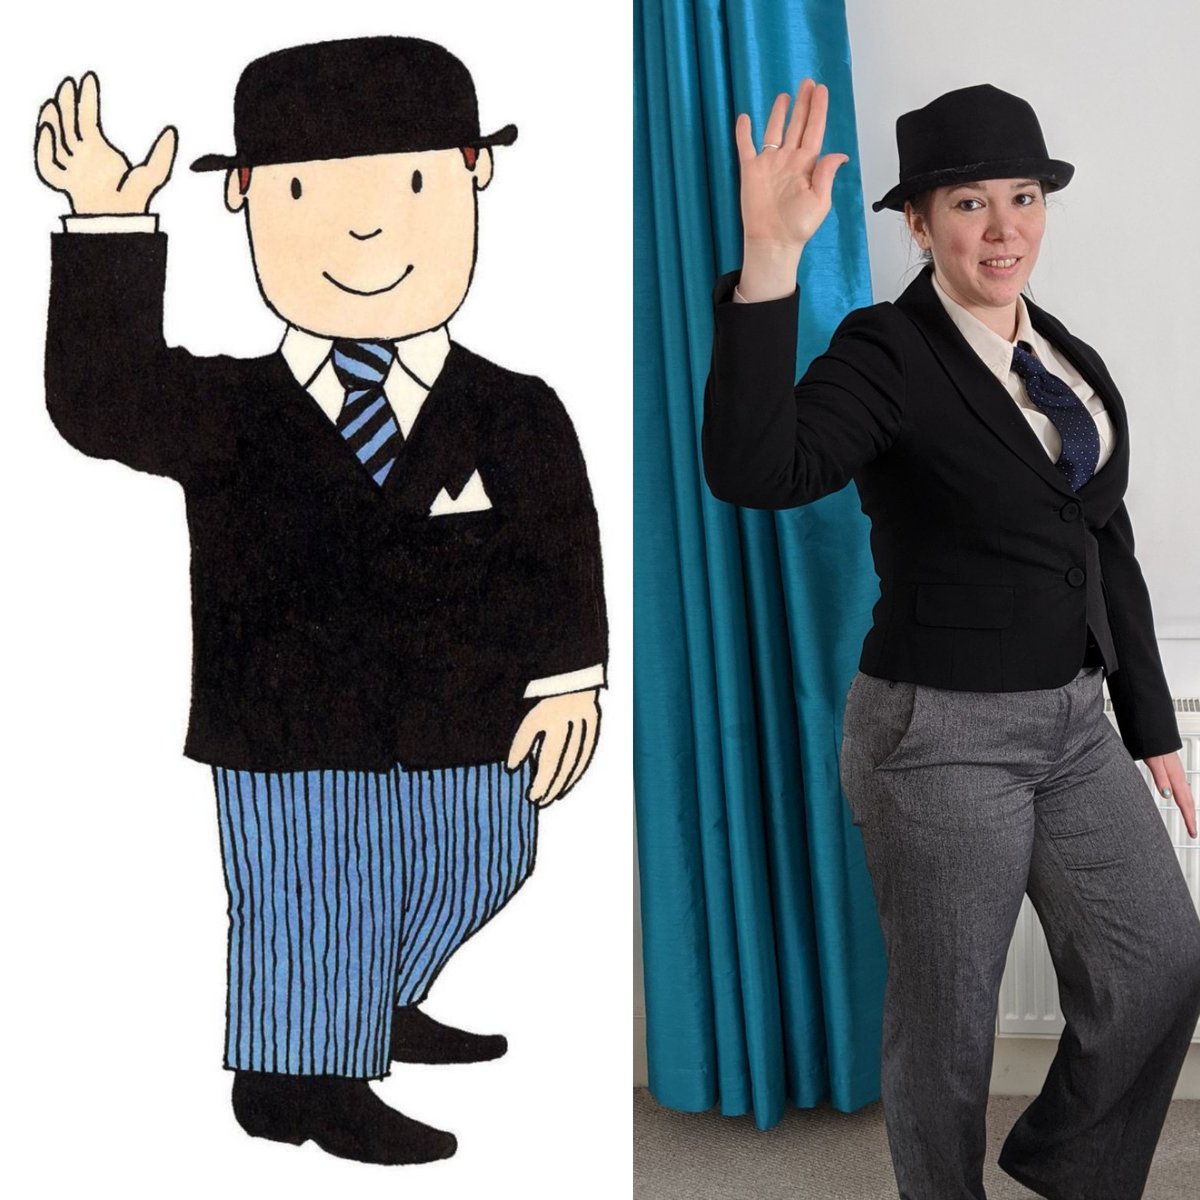 Next in my 26 costumes in two days  #TwoPointSixChallenge - Mr. Benn and a minion. (cheers  @multistable and  @andyricketts) Find out what the hell is going on and sponsor me here  https://uk.virginmoneygiving.com/RebeccaCooney2 